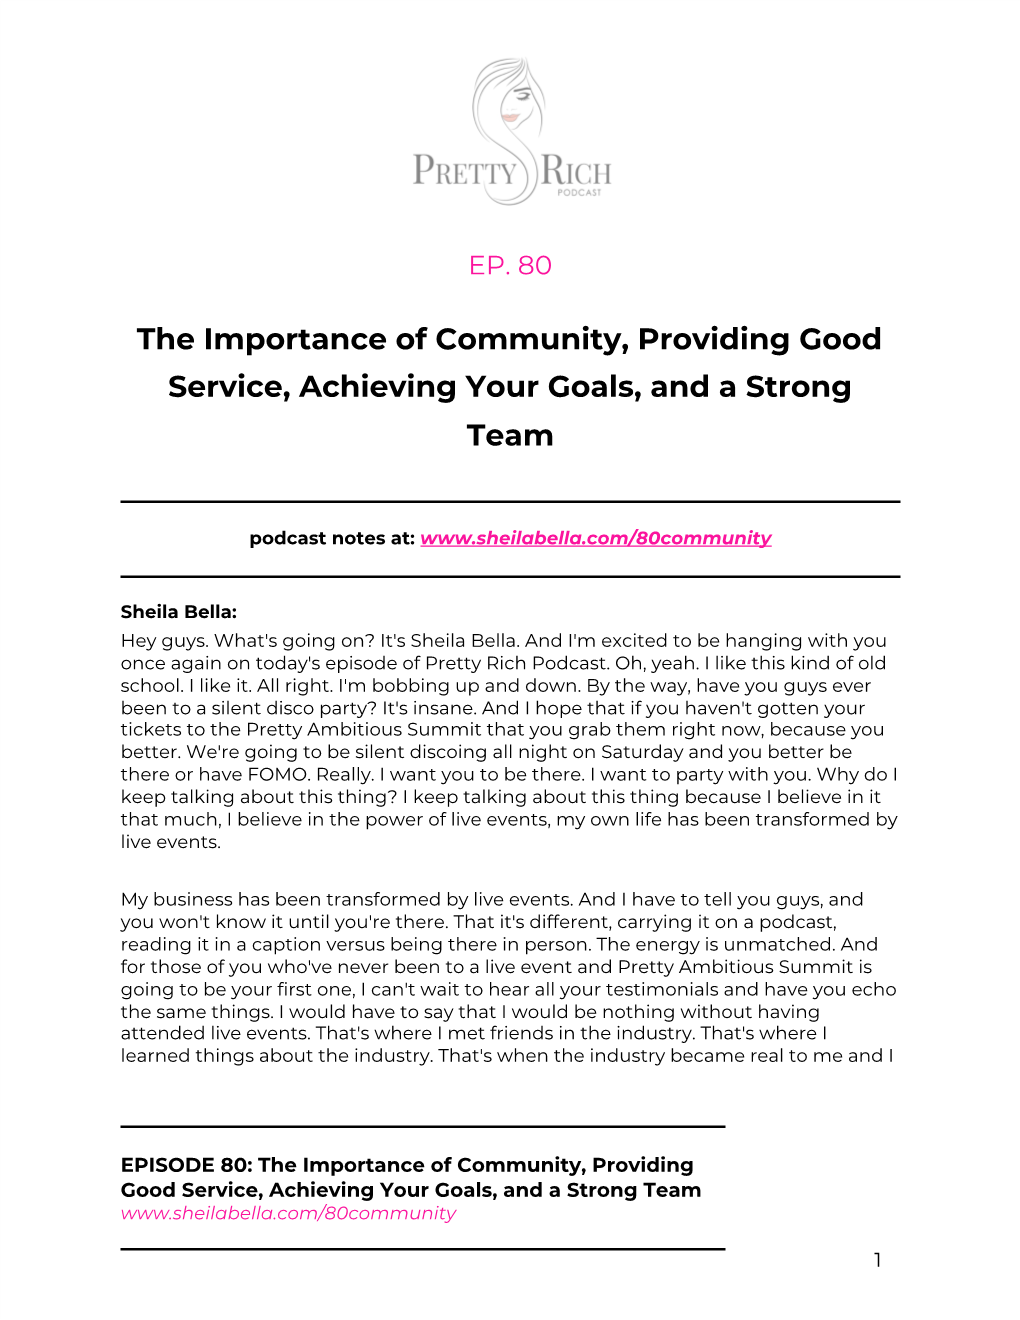 The Importance of Community, Providing Good Service, Achieving Your Goals, and a Strong Team